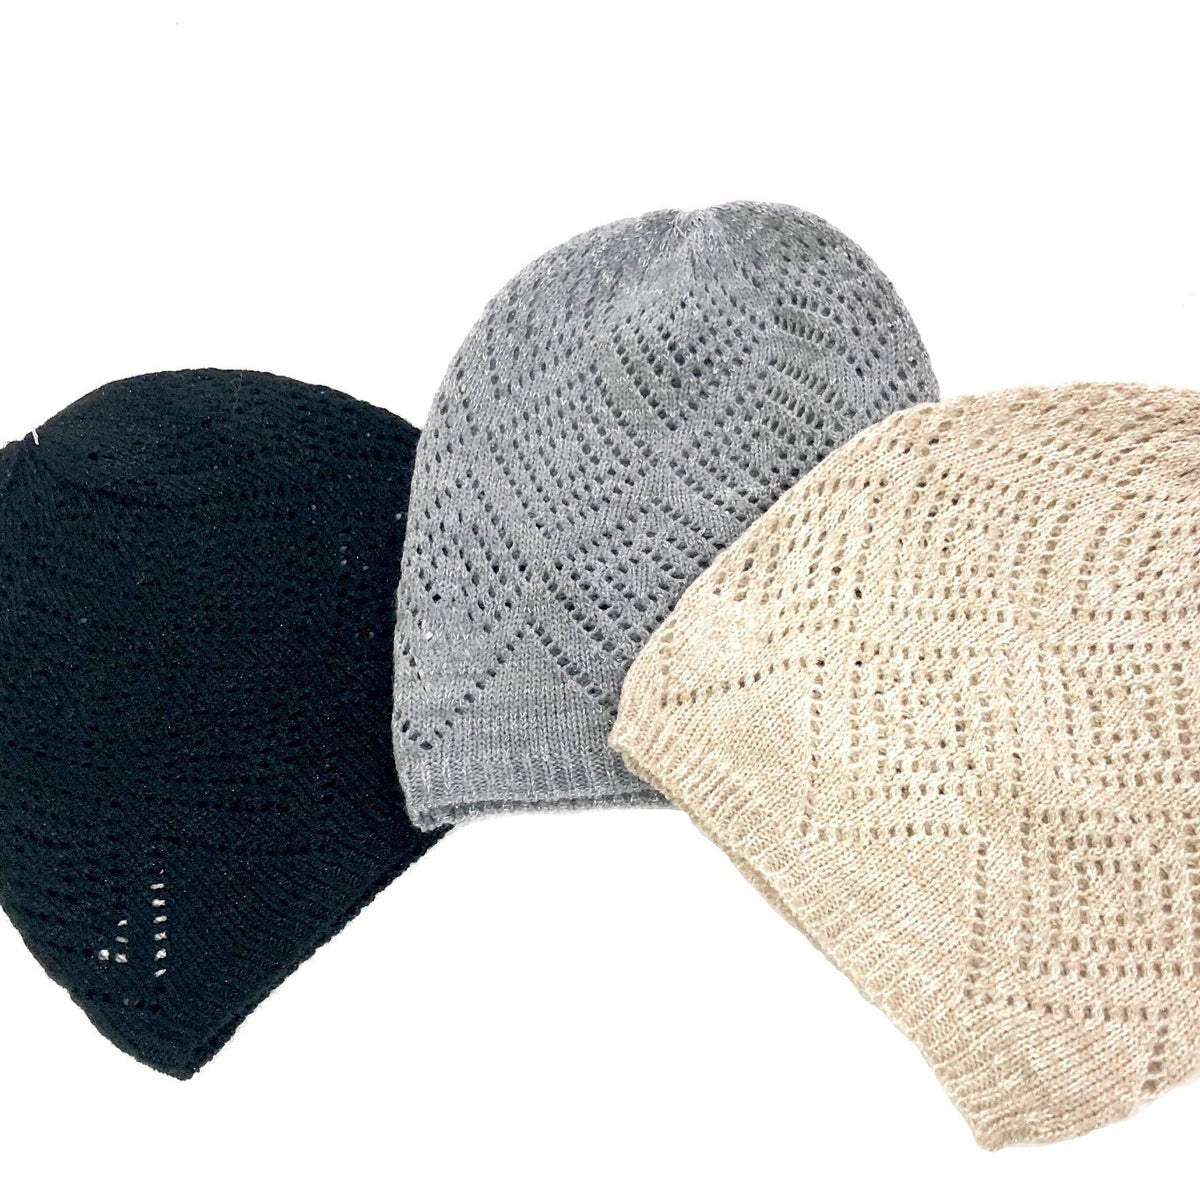 knit, hat, winter, cold, clothing